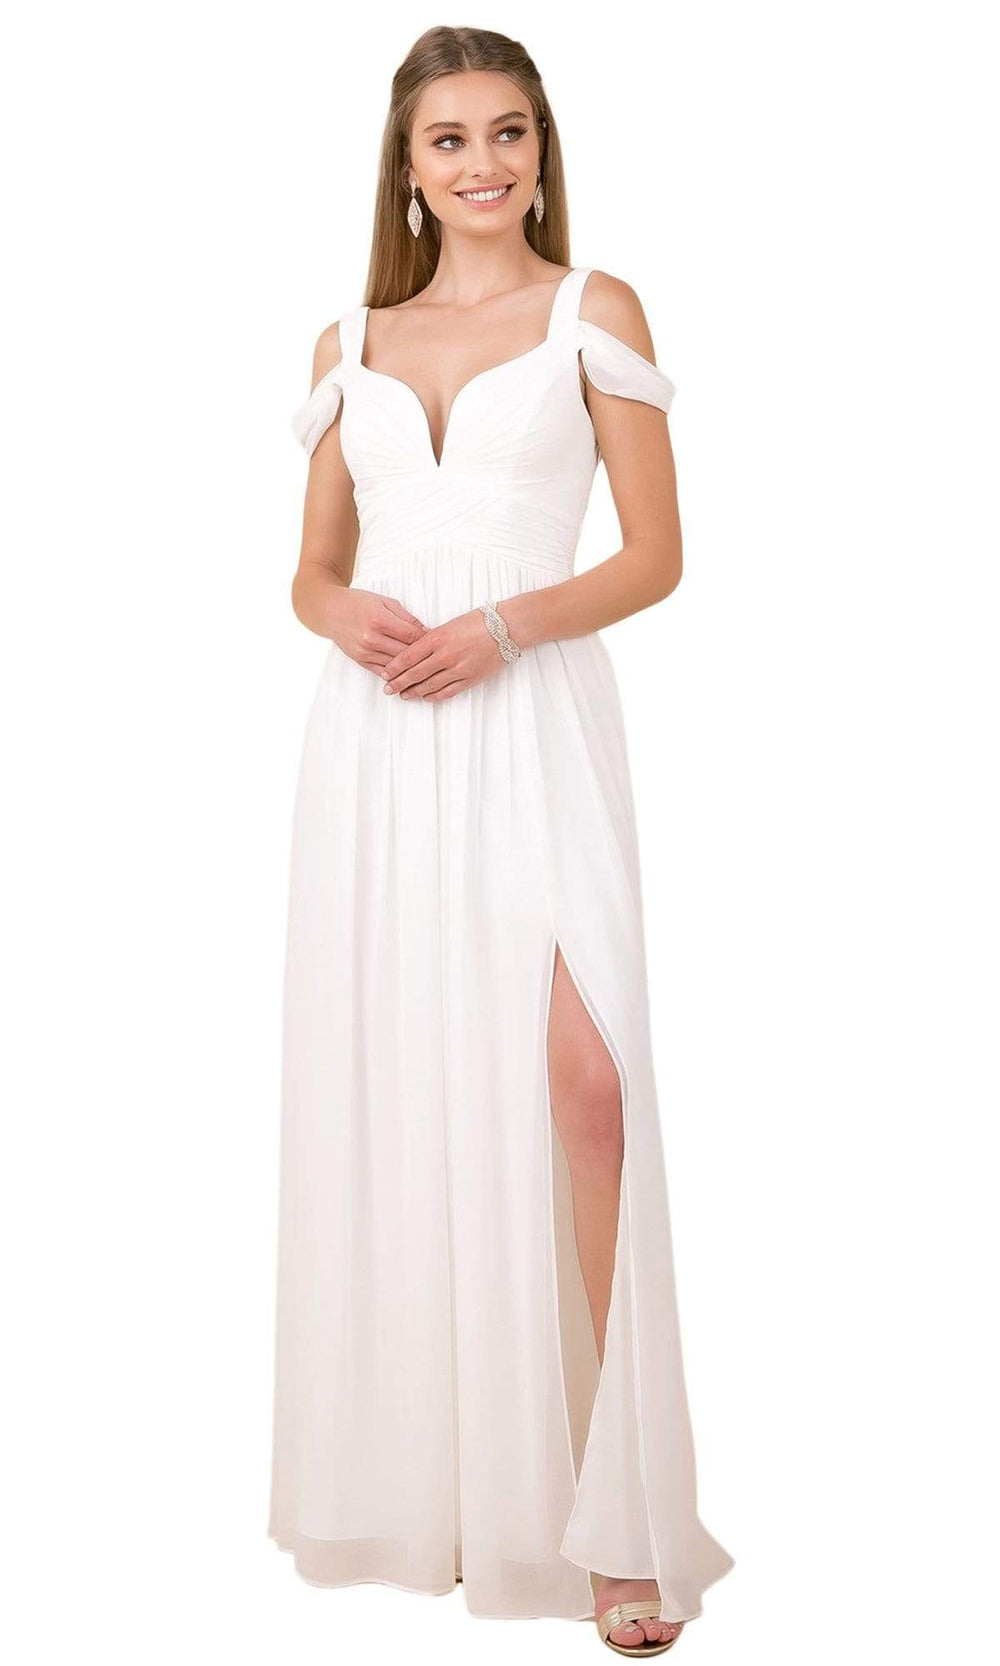 Nox Anabel - Cold Shoulder V-Neck Dress with Slit Y277 - 1 pc White in Size L Available CCSALE L / White